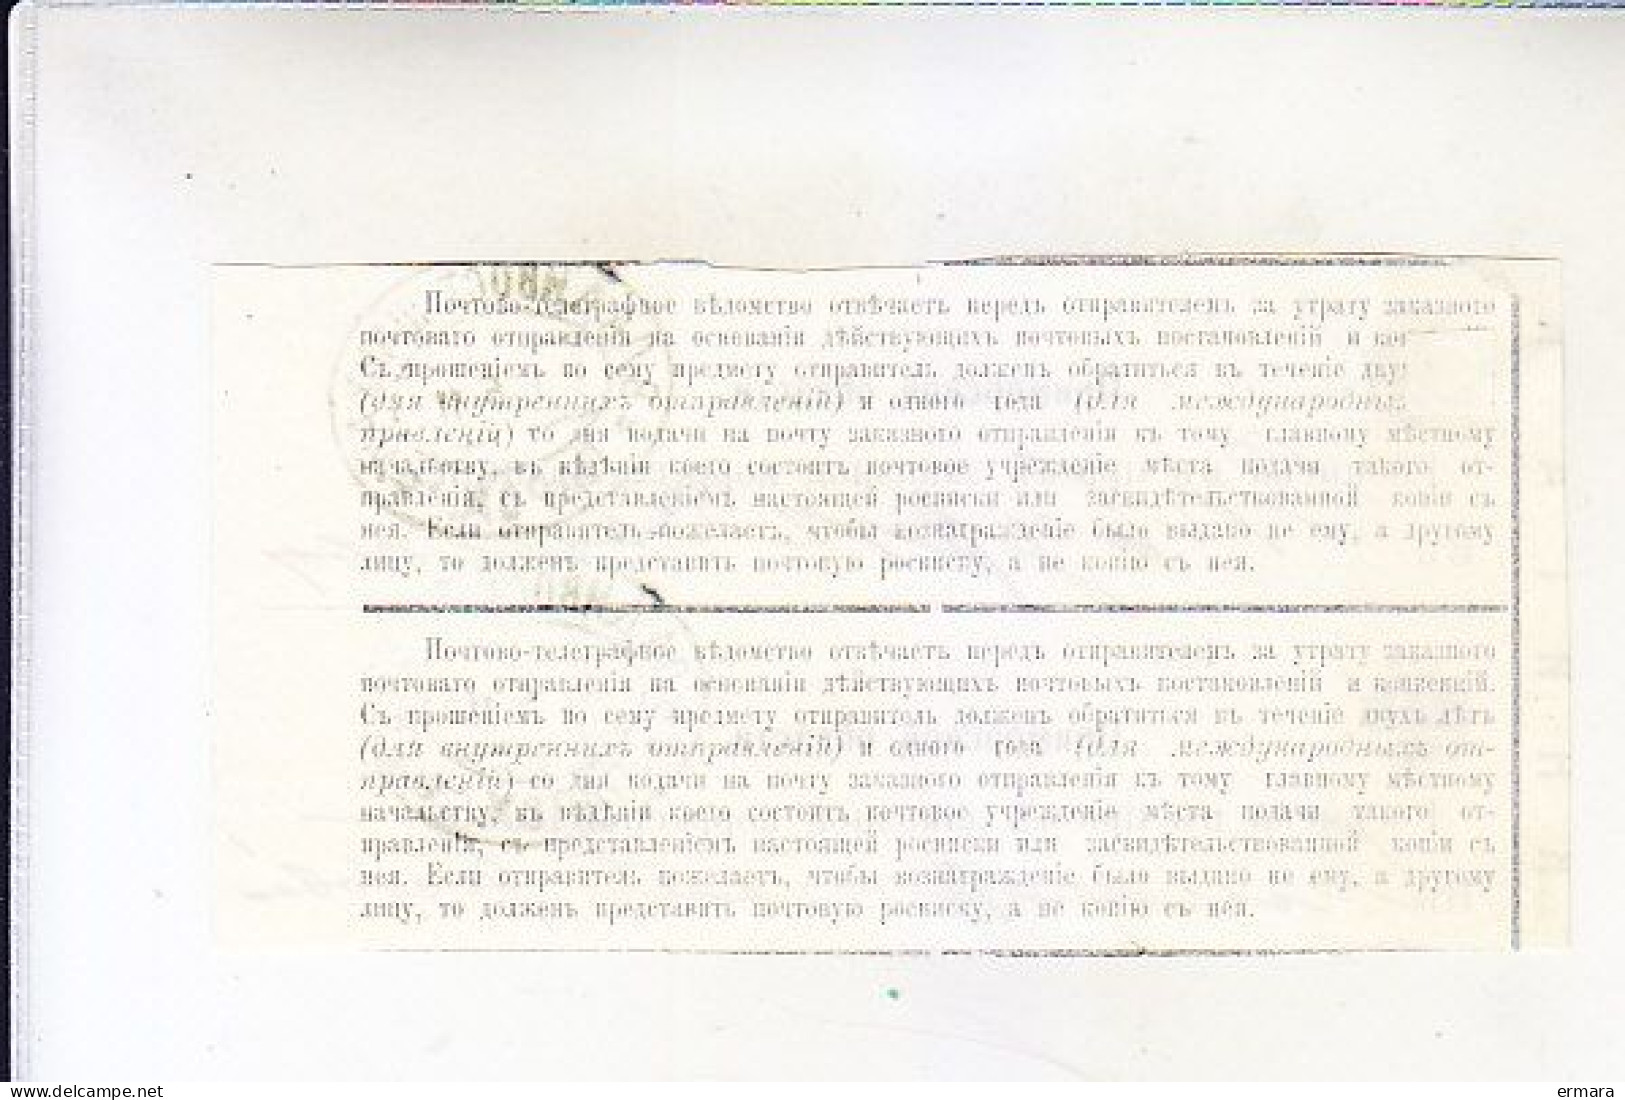 RECEIPTS FOR ACCEPTANCE OF REGISTERED CORRESPONDENCE (2 PCS.) STEAMSHIP MAIL STEAMSHIP VLADIVOSTOK - SHANGHAI CHINA 1911 - Siberia Y Extremo Oriente